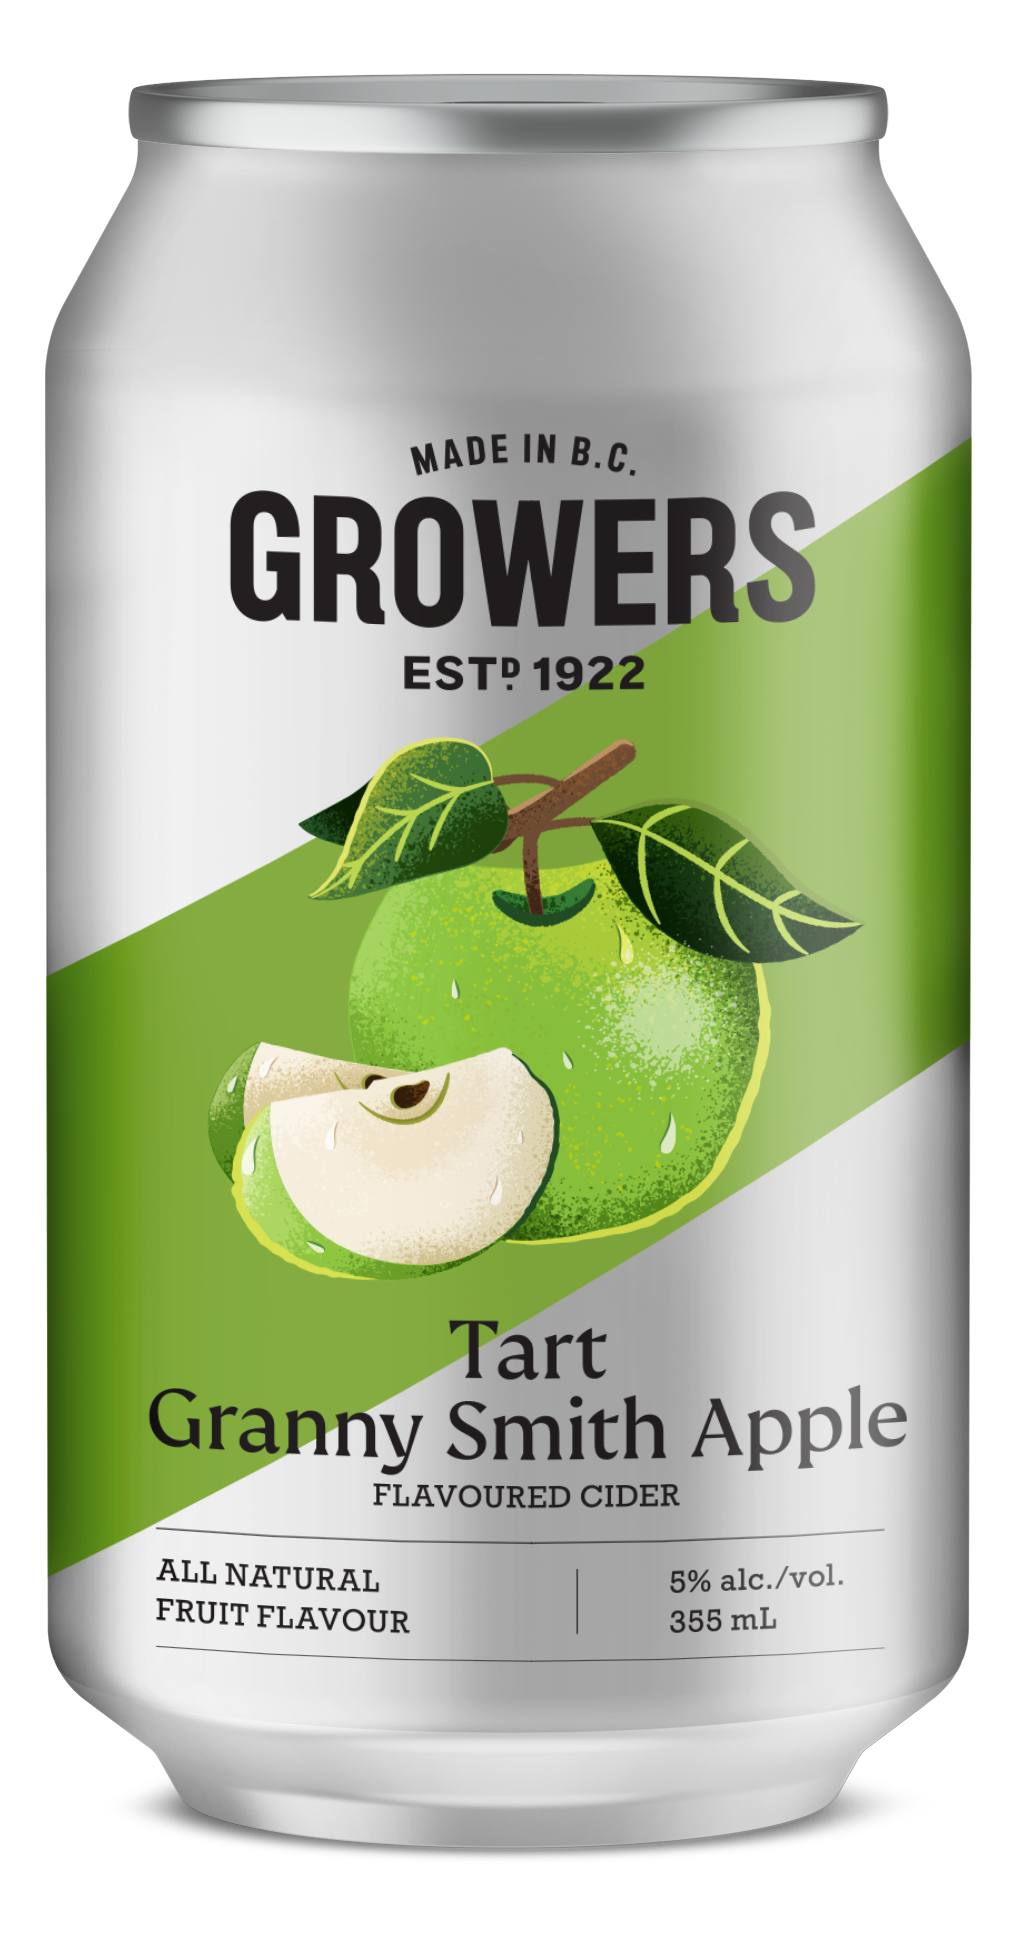 Can of Growers Tart Granny Smith Apple cider